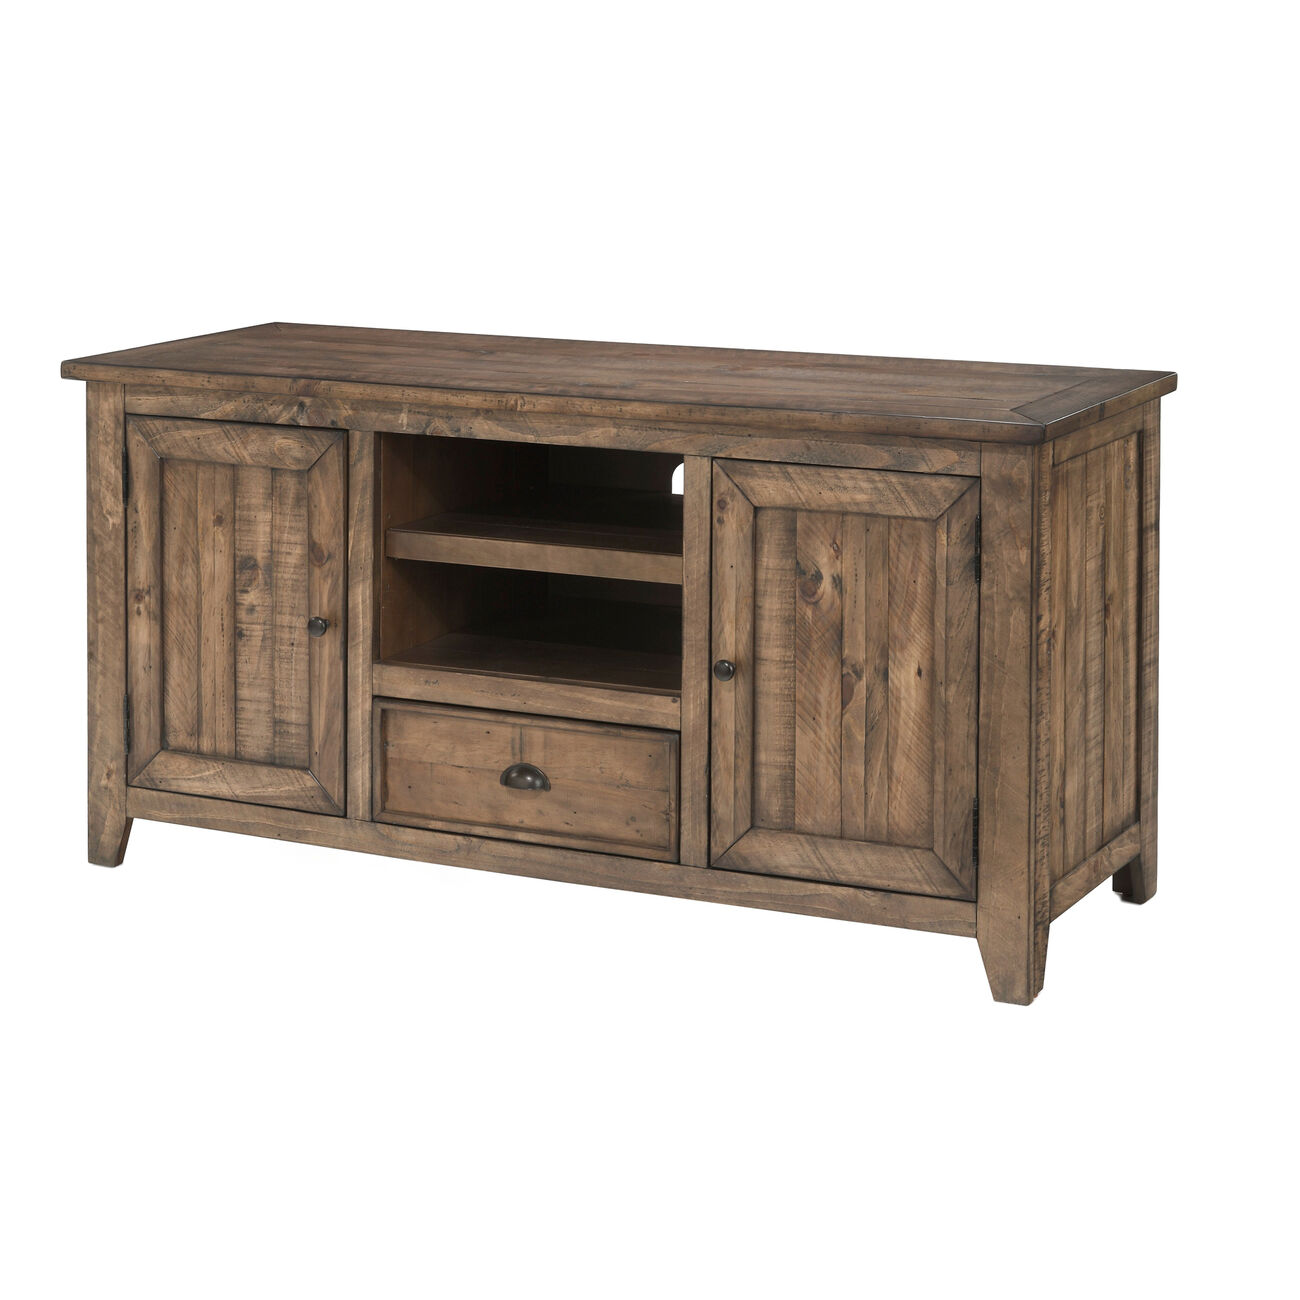 Coastal Style Wooden TV Stand with 2 Cabinets and 1 Drawer, Brown